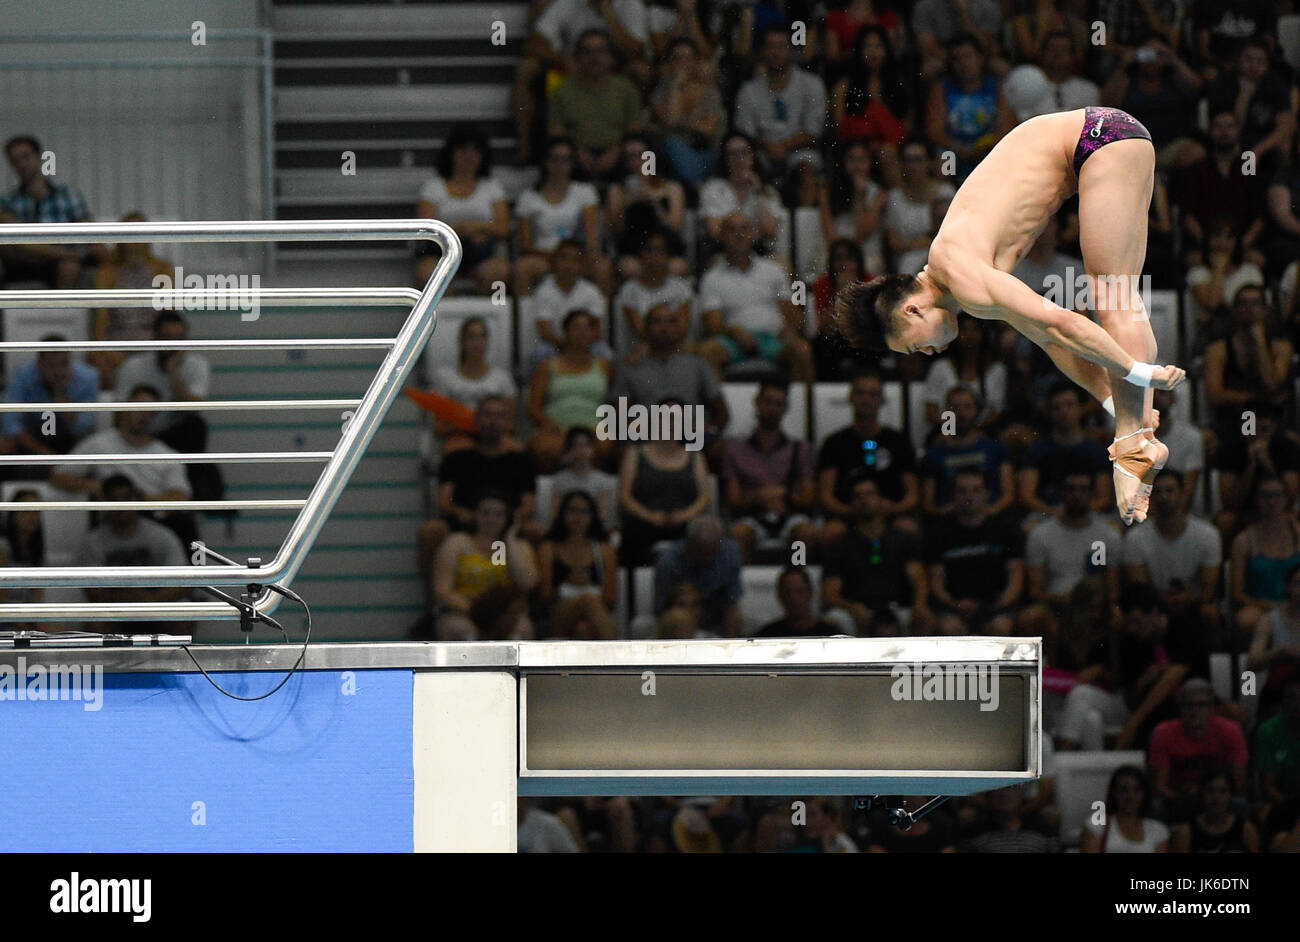 Budapest, Hungary. 22nd July, 2017. China's Aisen Chen in action during the men's 10m platform finale of the FINA World Championships 2017 in Budapest, Hungary, 22 July 2017. Photo: Axel Heimken/dpa/Alamy Live News Stock Photo